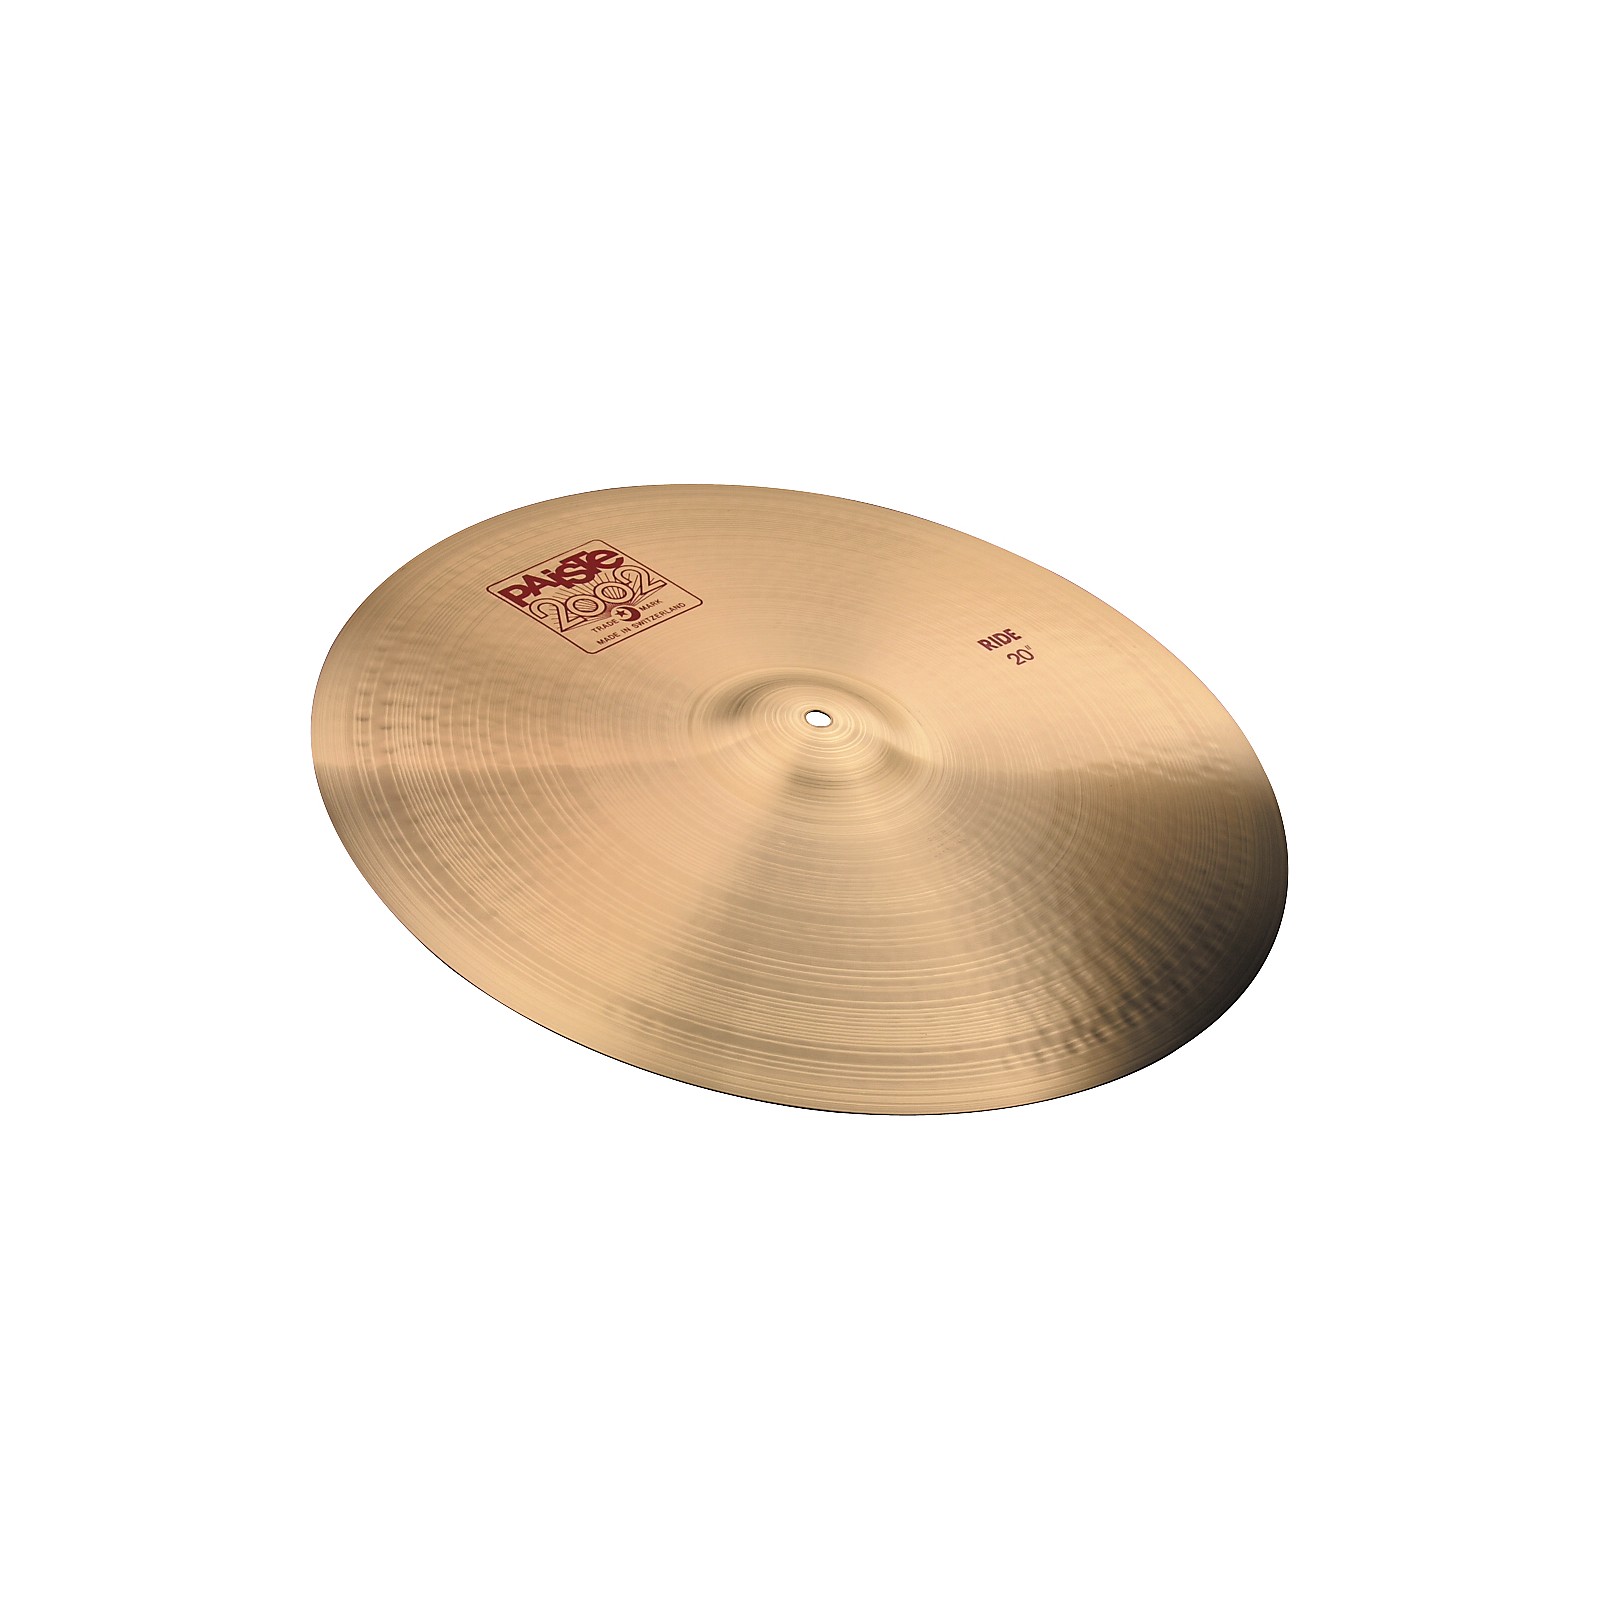 Paiste 2002 Ride Cymbal 22 in. | Guitar Center